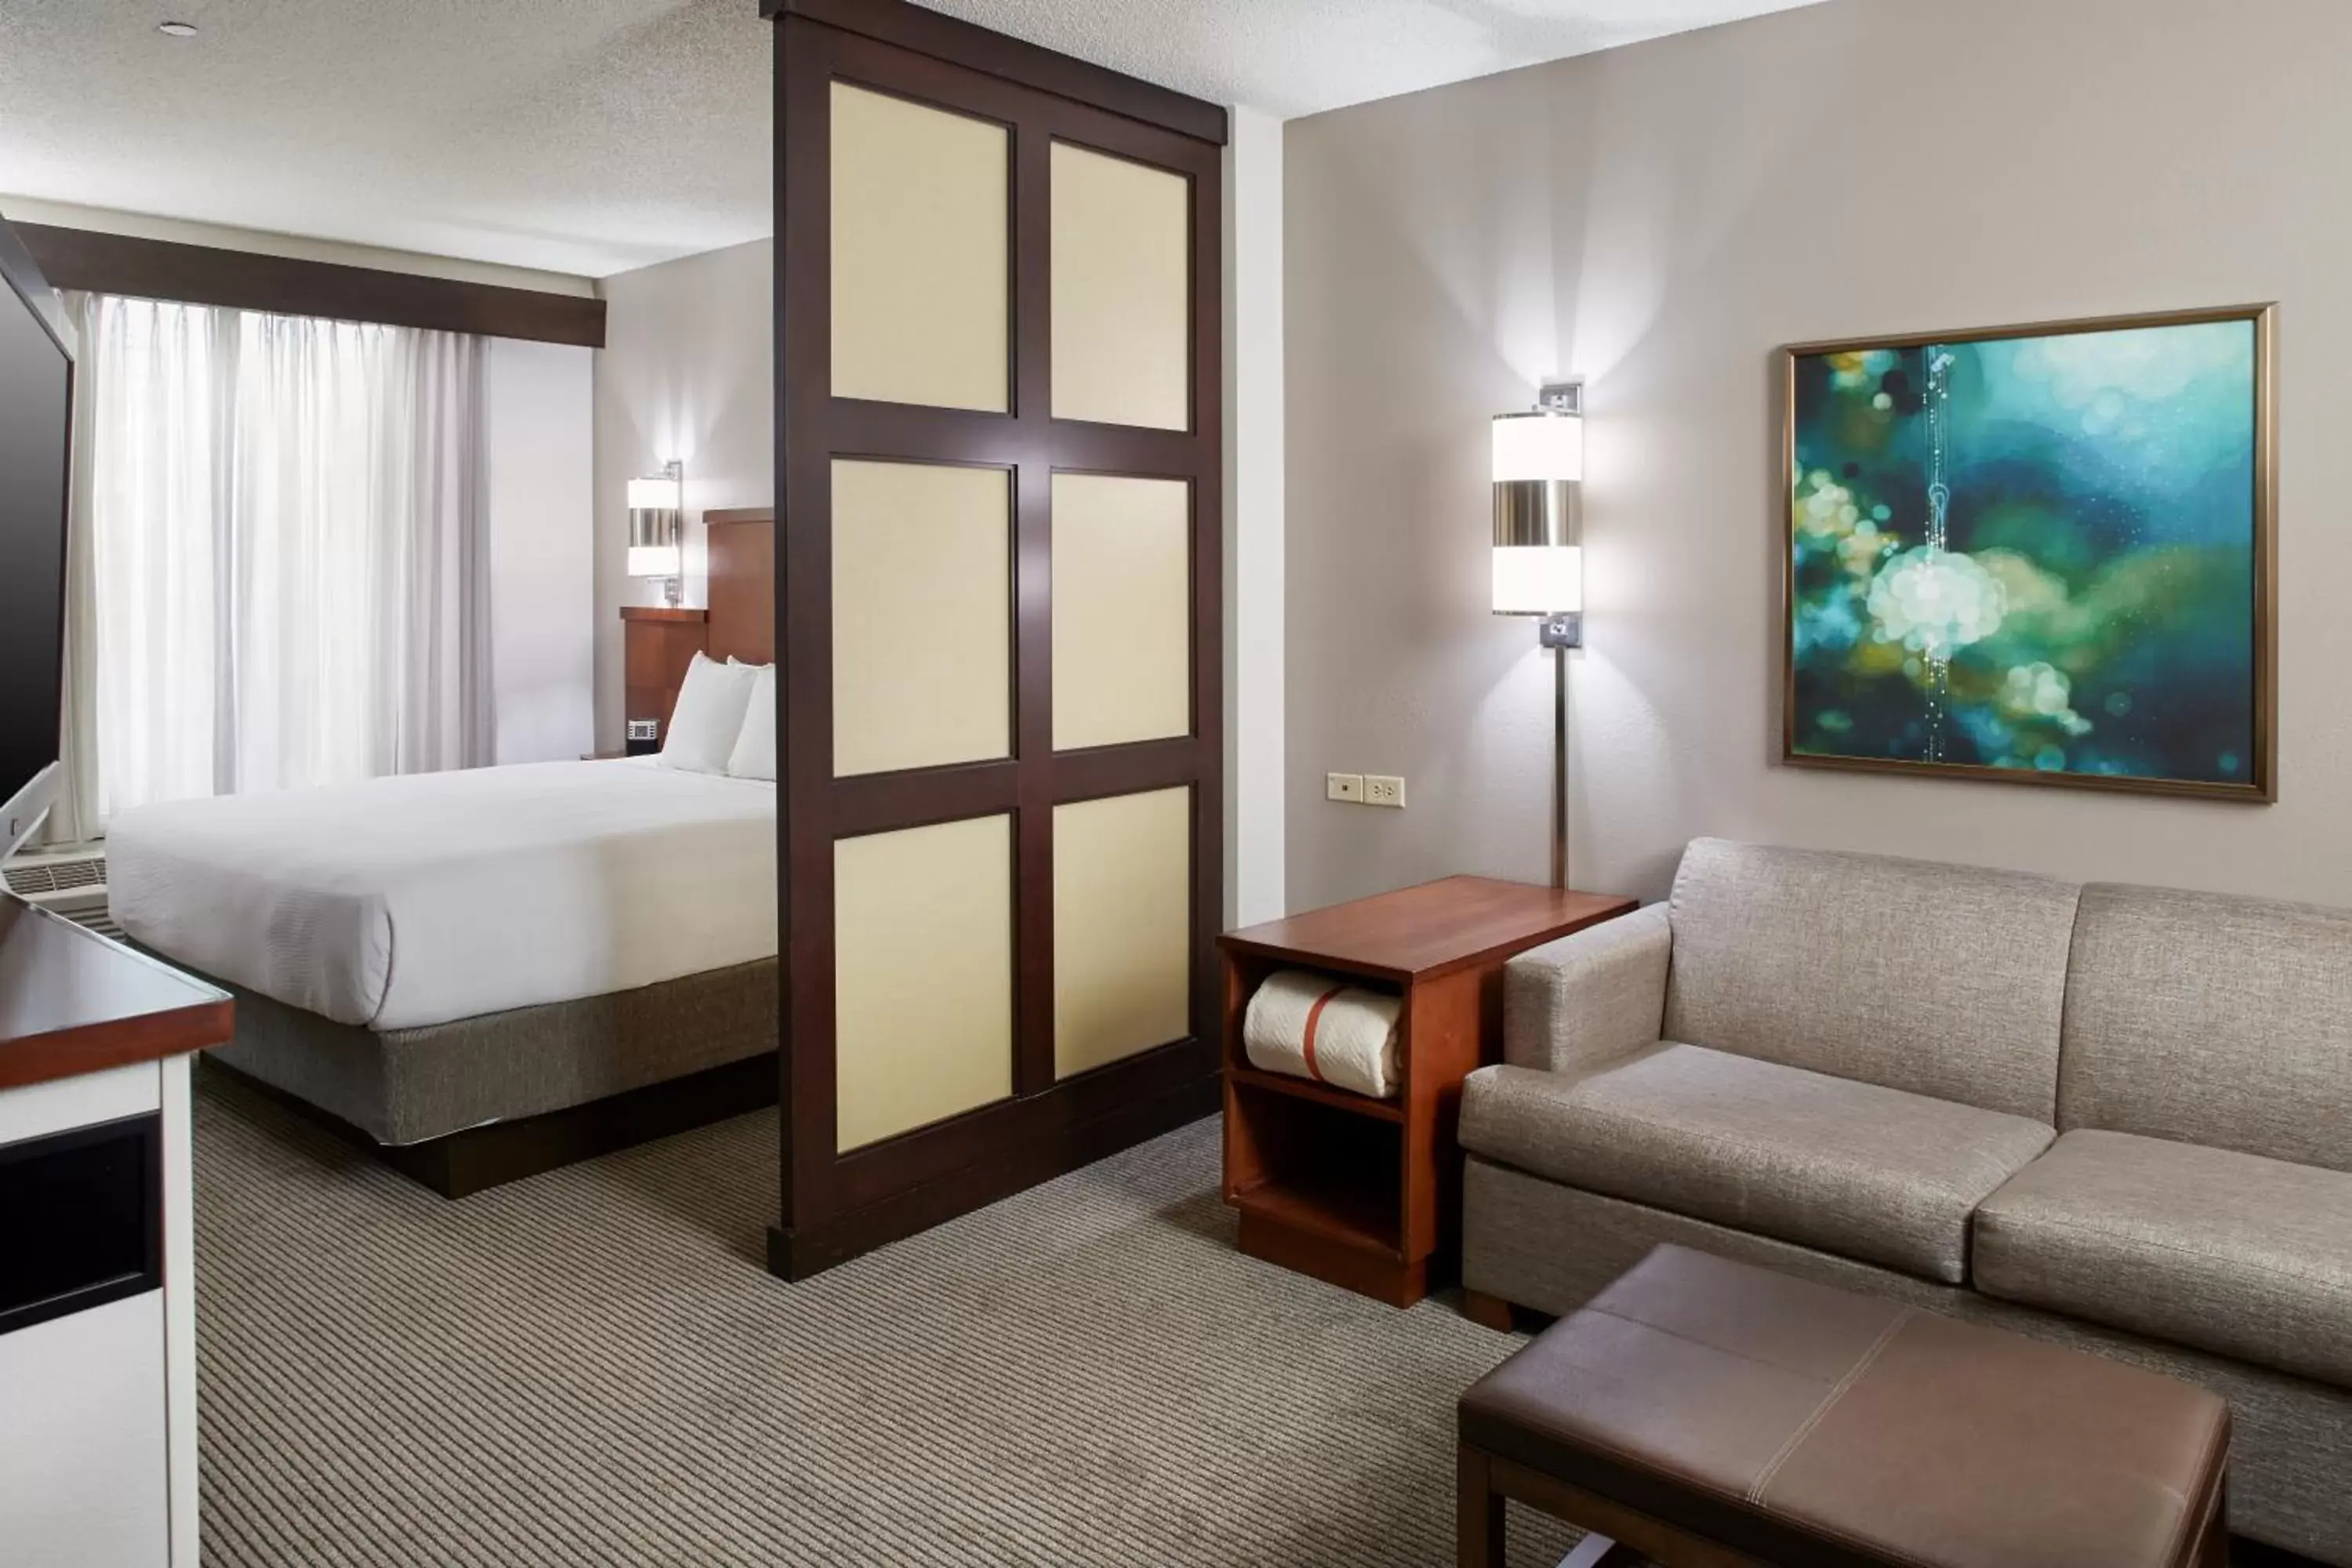 King Room with Sofa Bed and Accessible Tub - Disability Access in Hyatt Place Sacramento Rancho Cordova